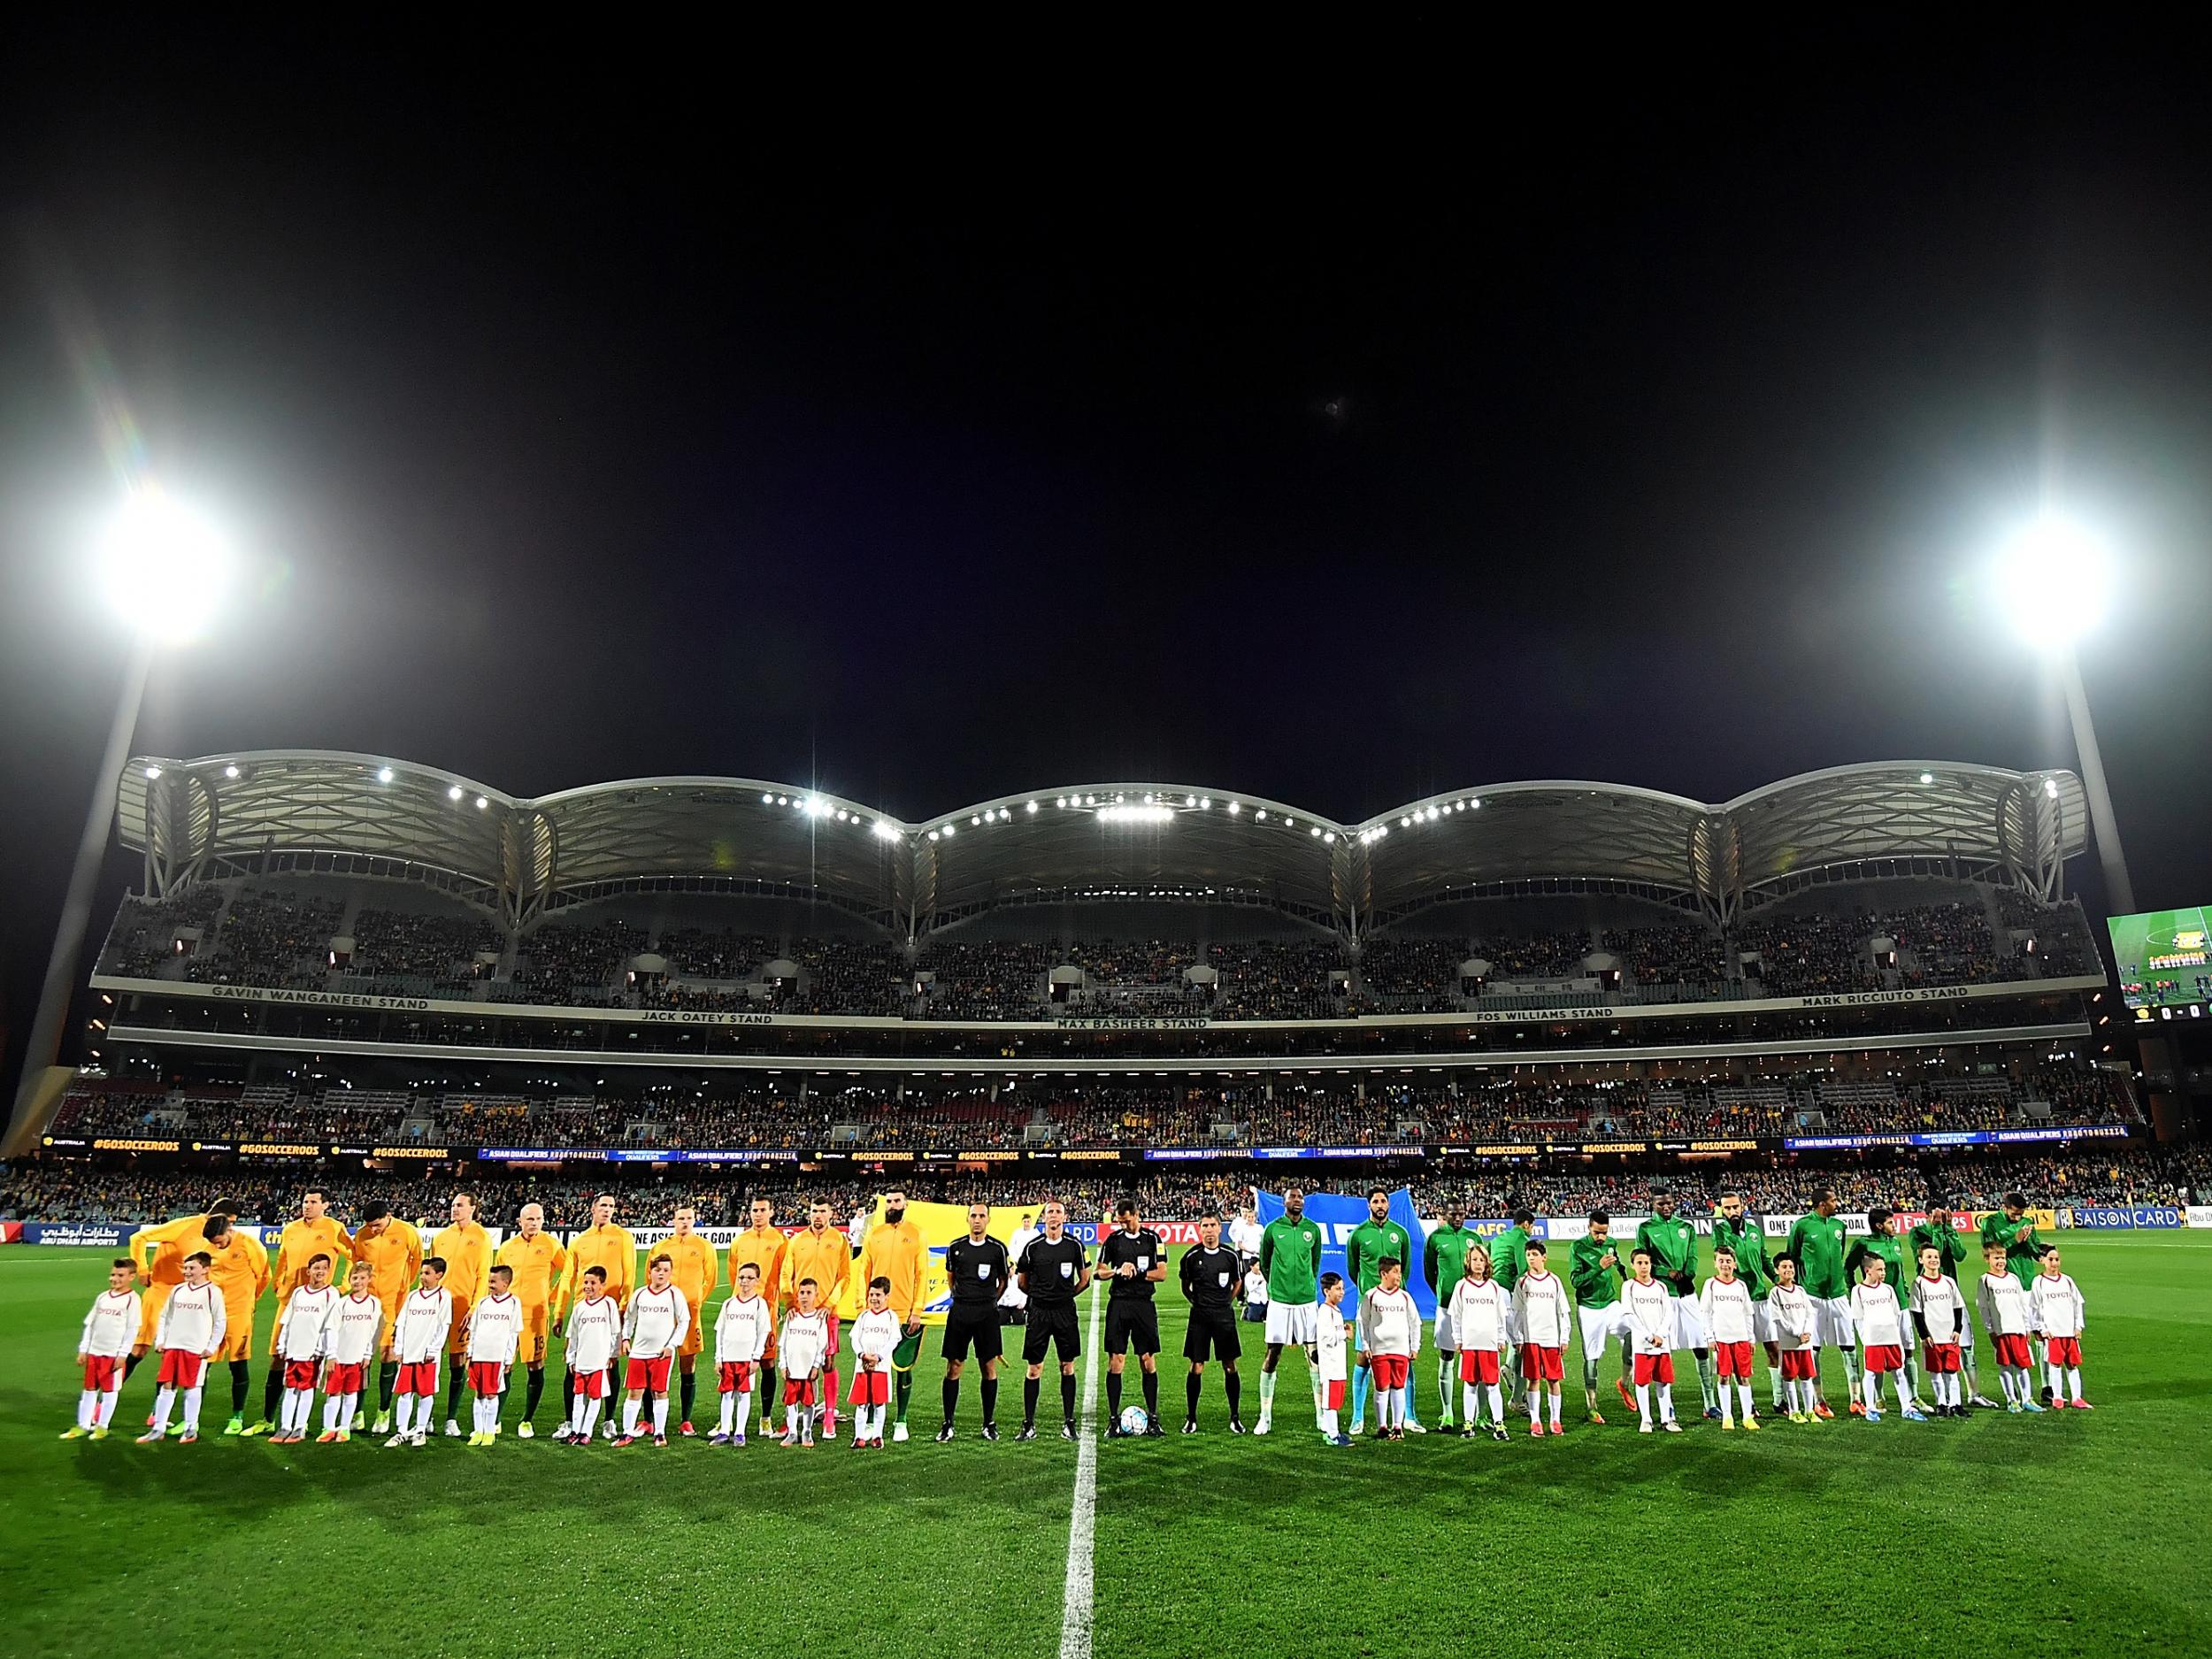 The two two teams line-up prior to kick-off for the national anthems